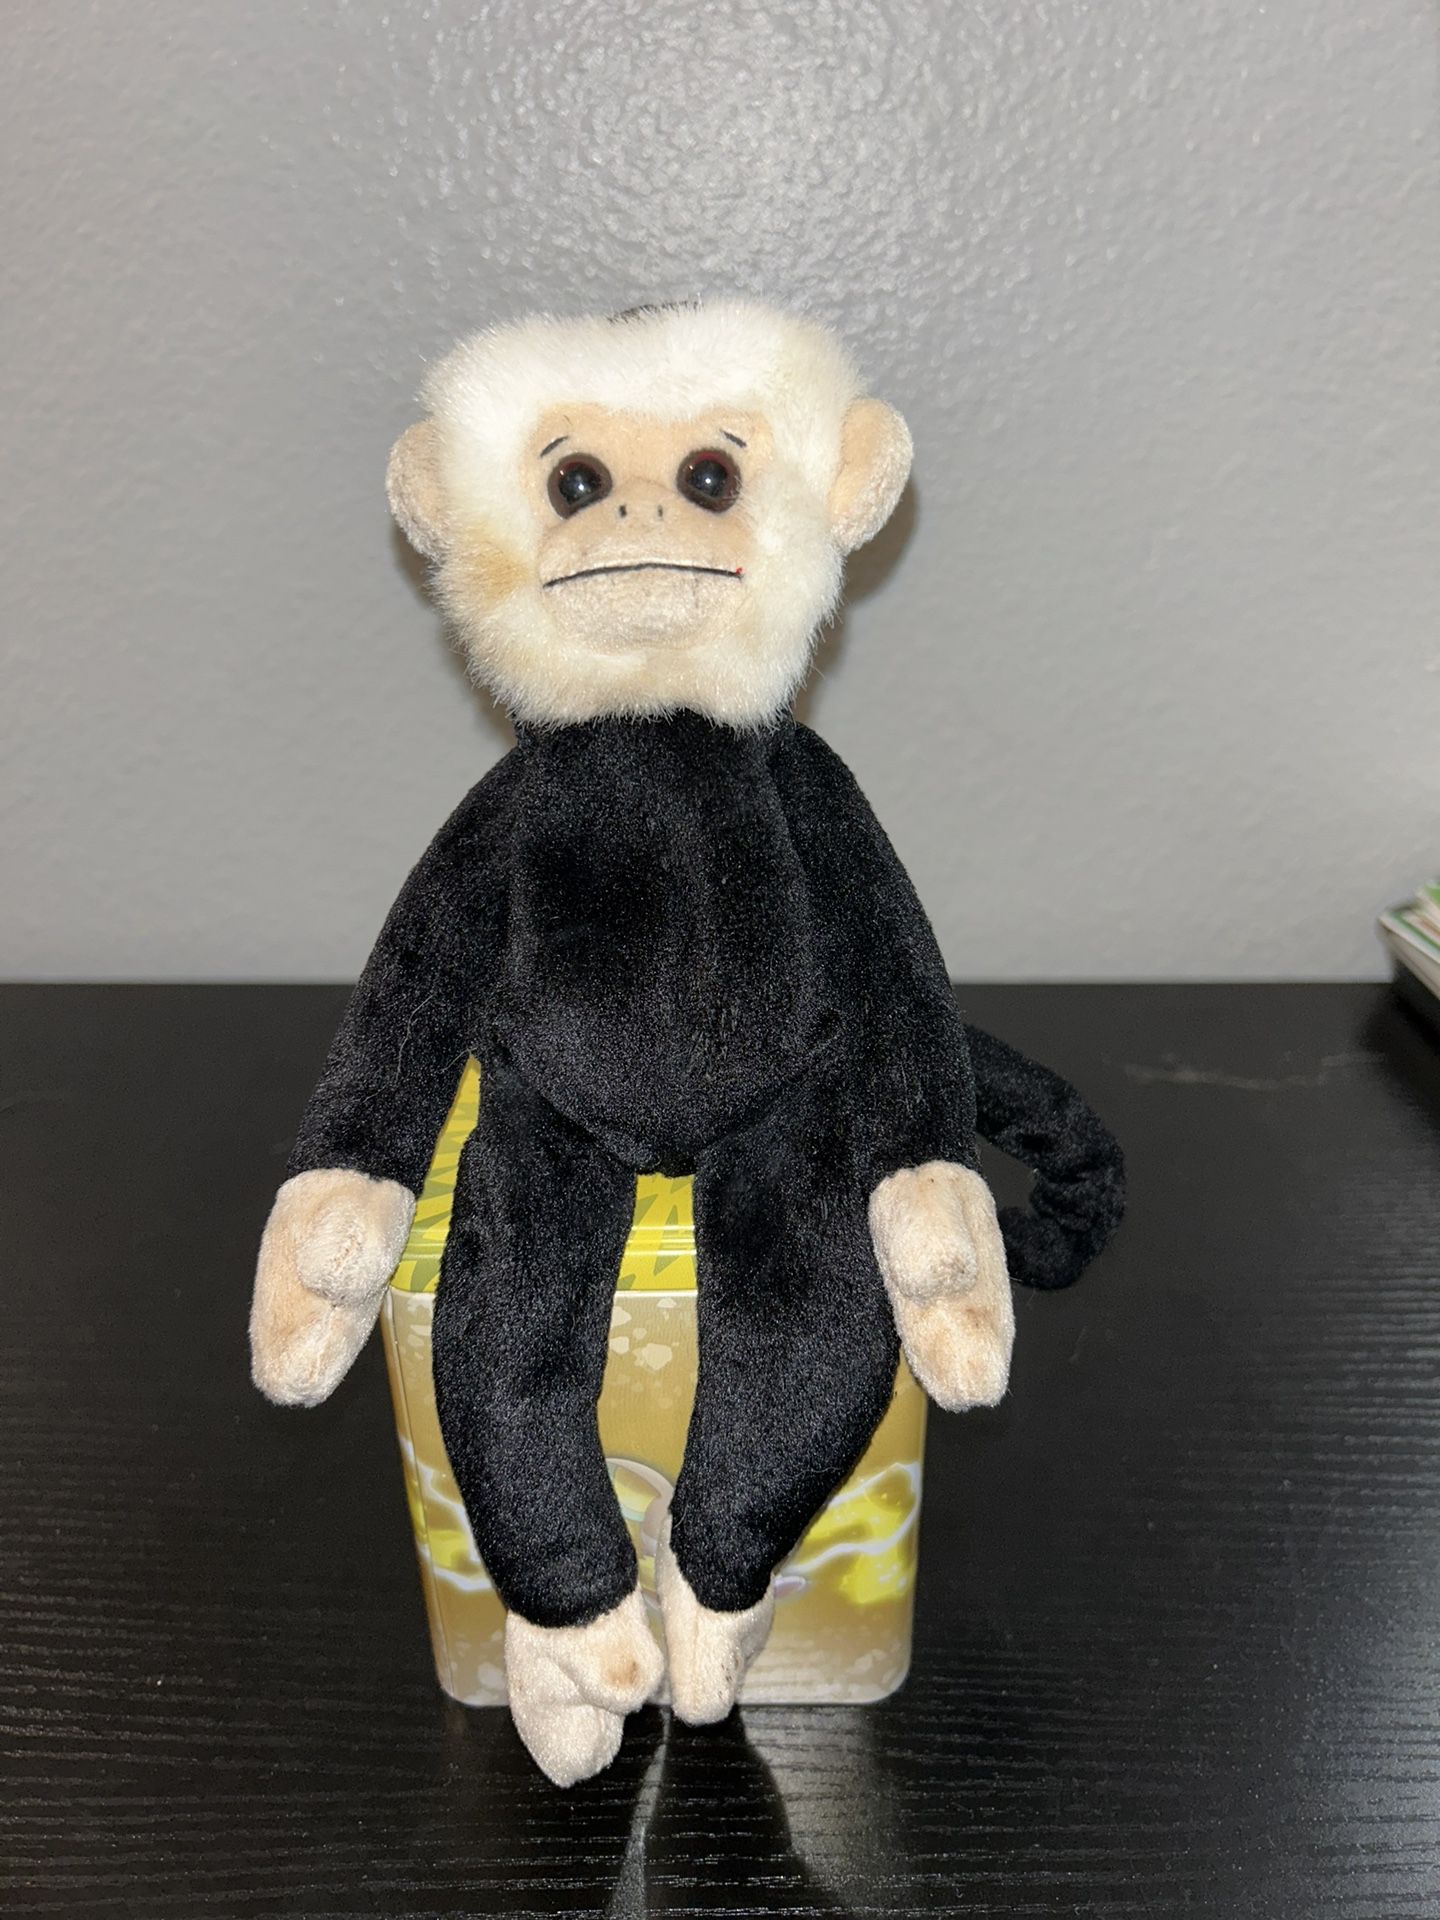 Ty Beanie Baby Mooch the Spider Monkey 1(contact info removed) Gasport Errors No Stamp